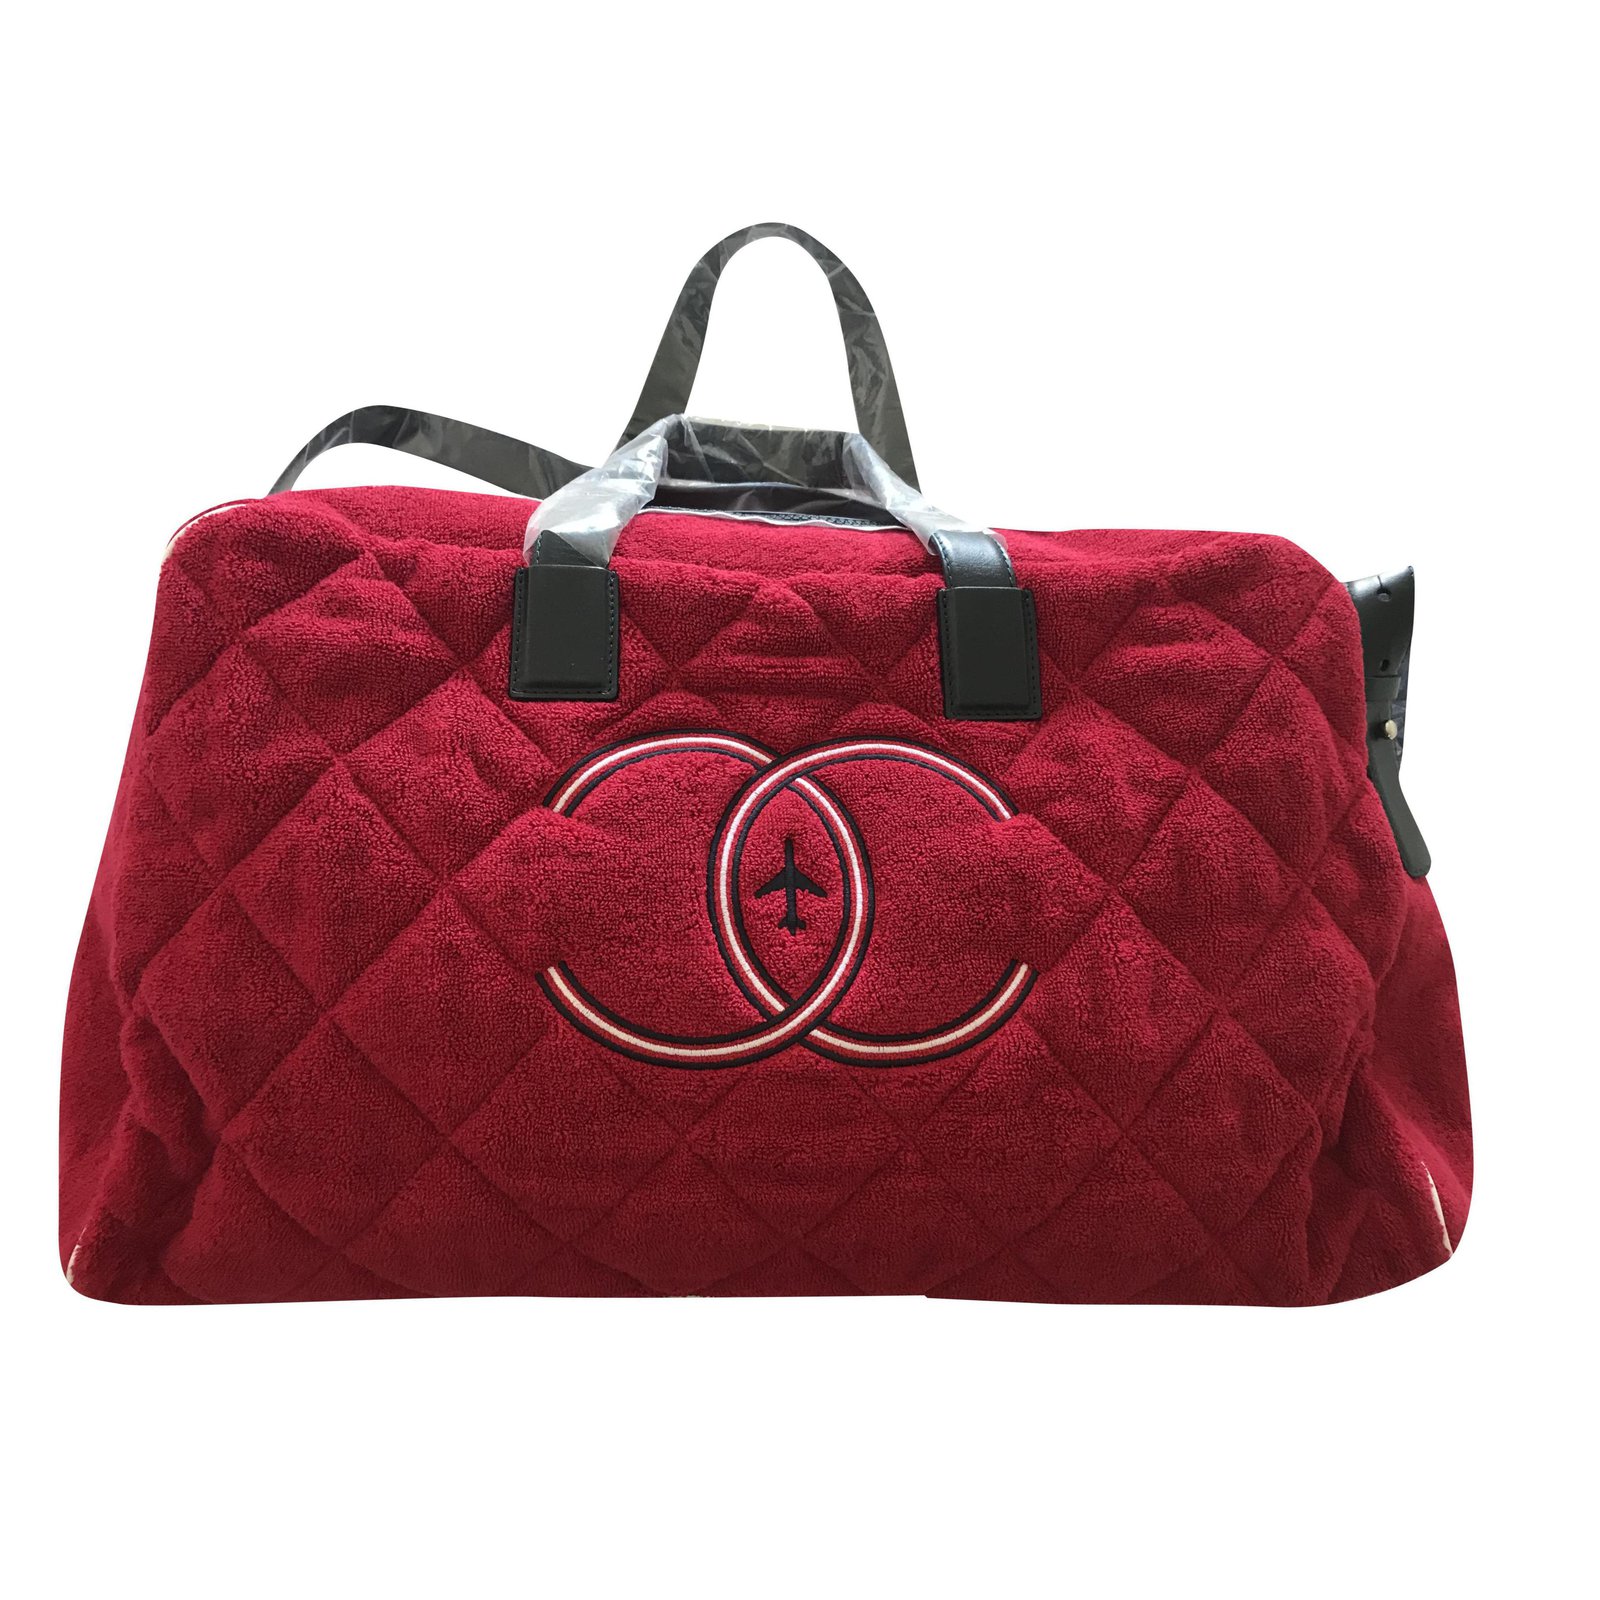 CHANEL N°1 Tote Bag Cotton Red Camellia 45 x 30 x 25 cm New Novelty Japan